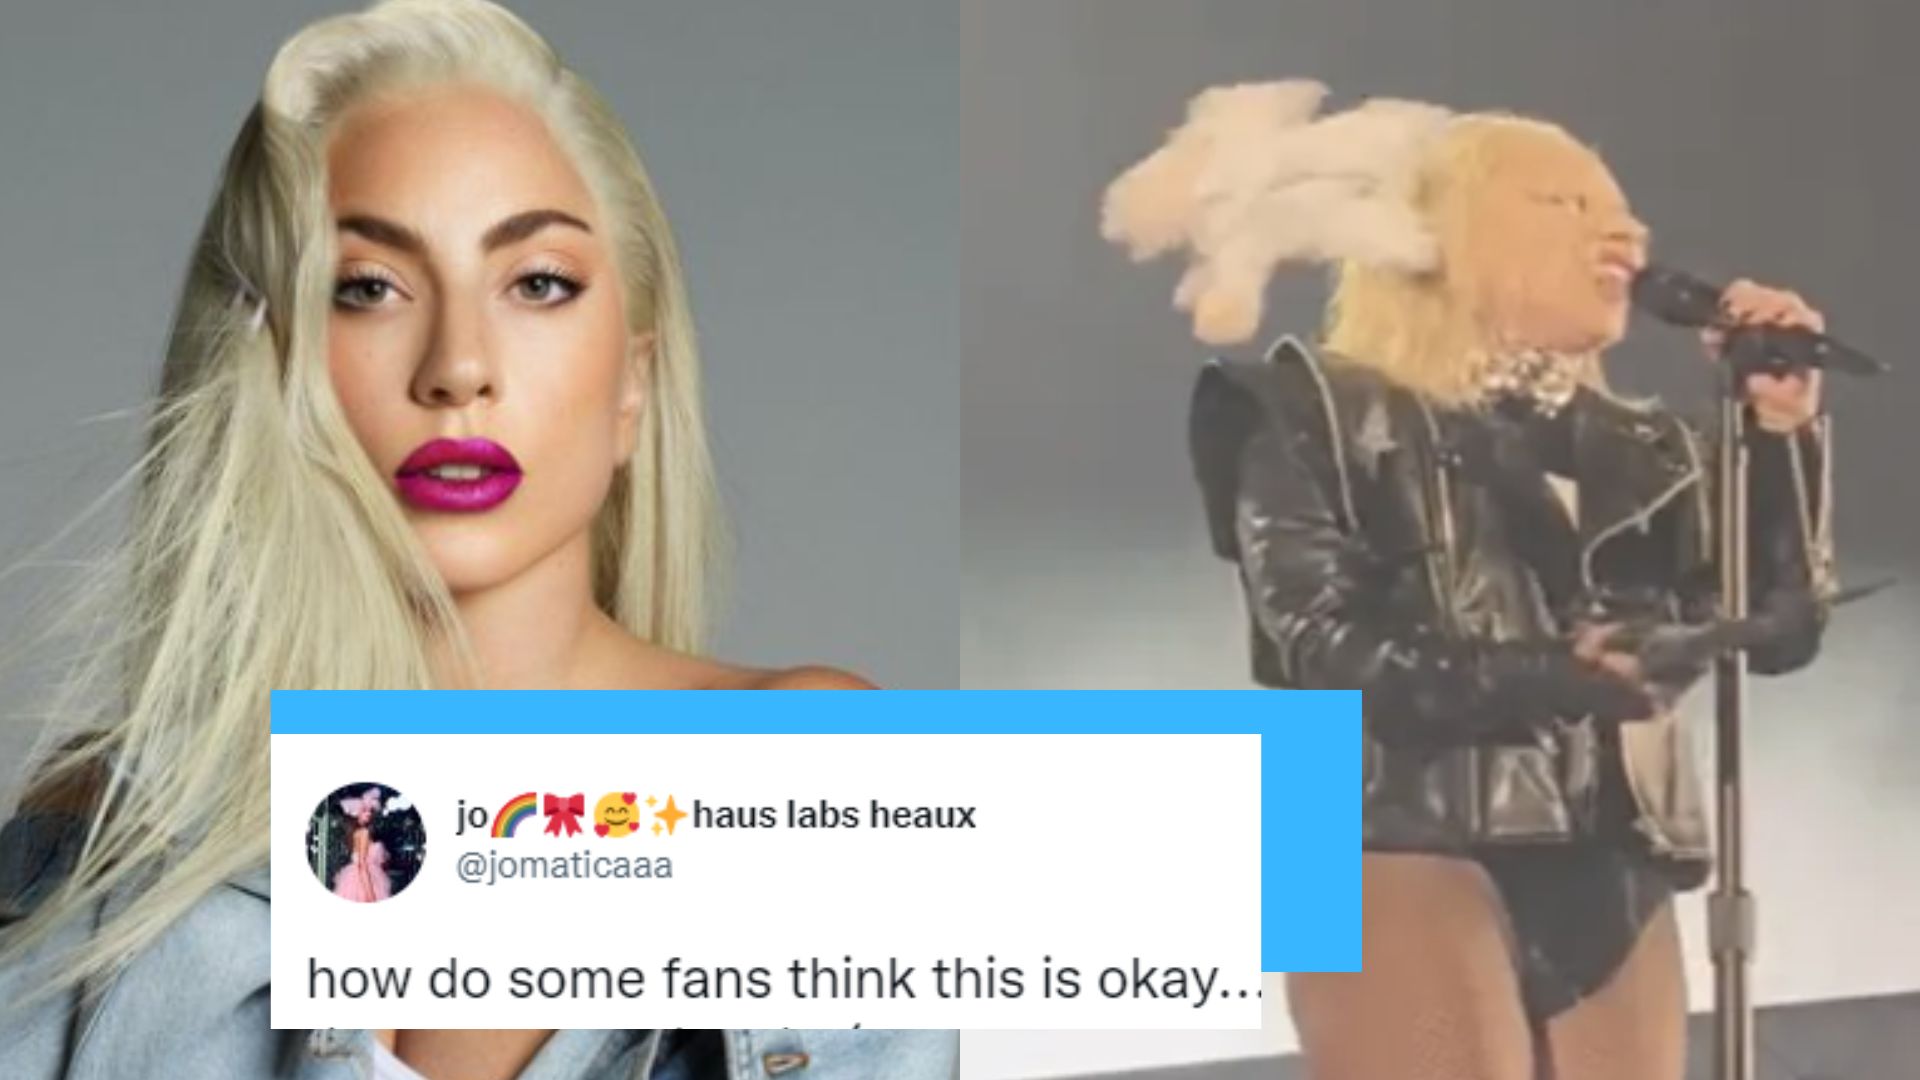 Lady Gaga Gets Hit By A Stuffed Toy During Her Performance. Love Or Hate, It’s Not Okay To Throw Things At A Celeb